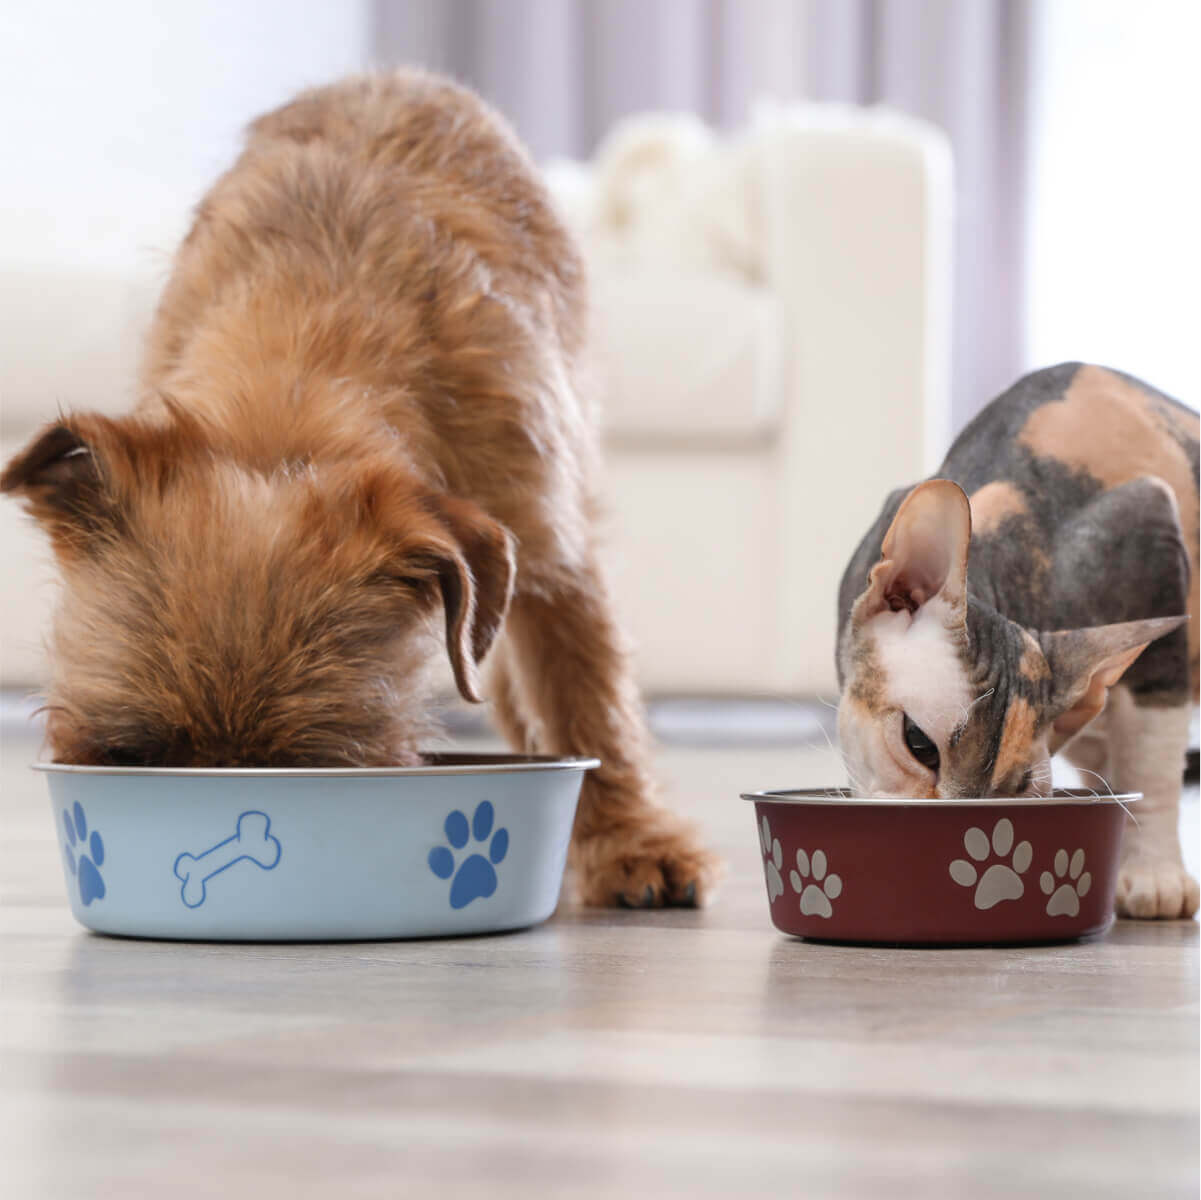 Two dogs and a cat happily eating from their bowls, enjoying their mealtime together.